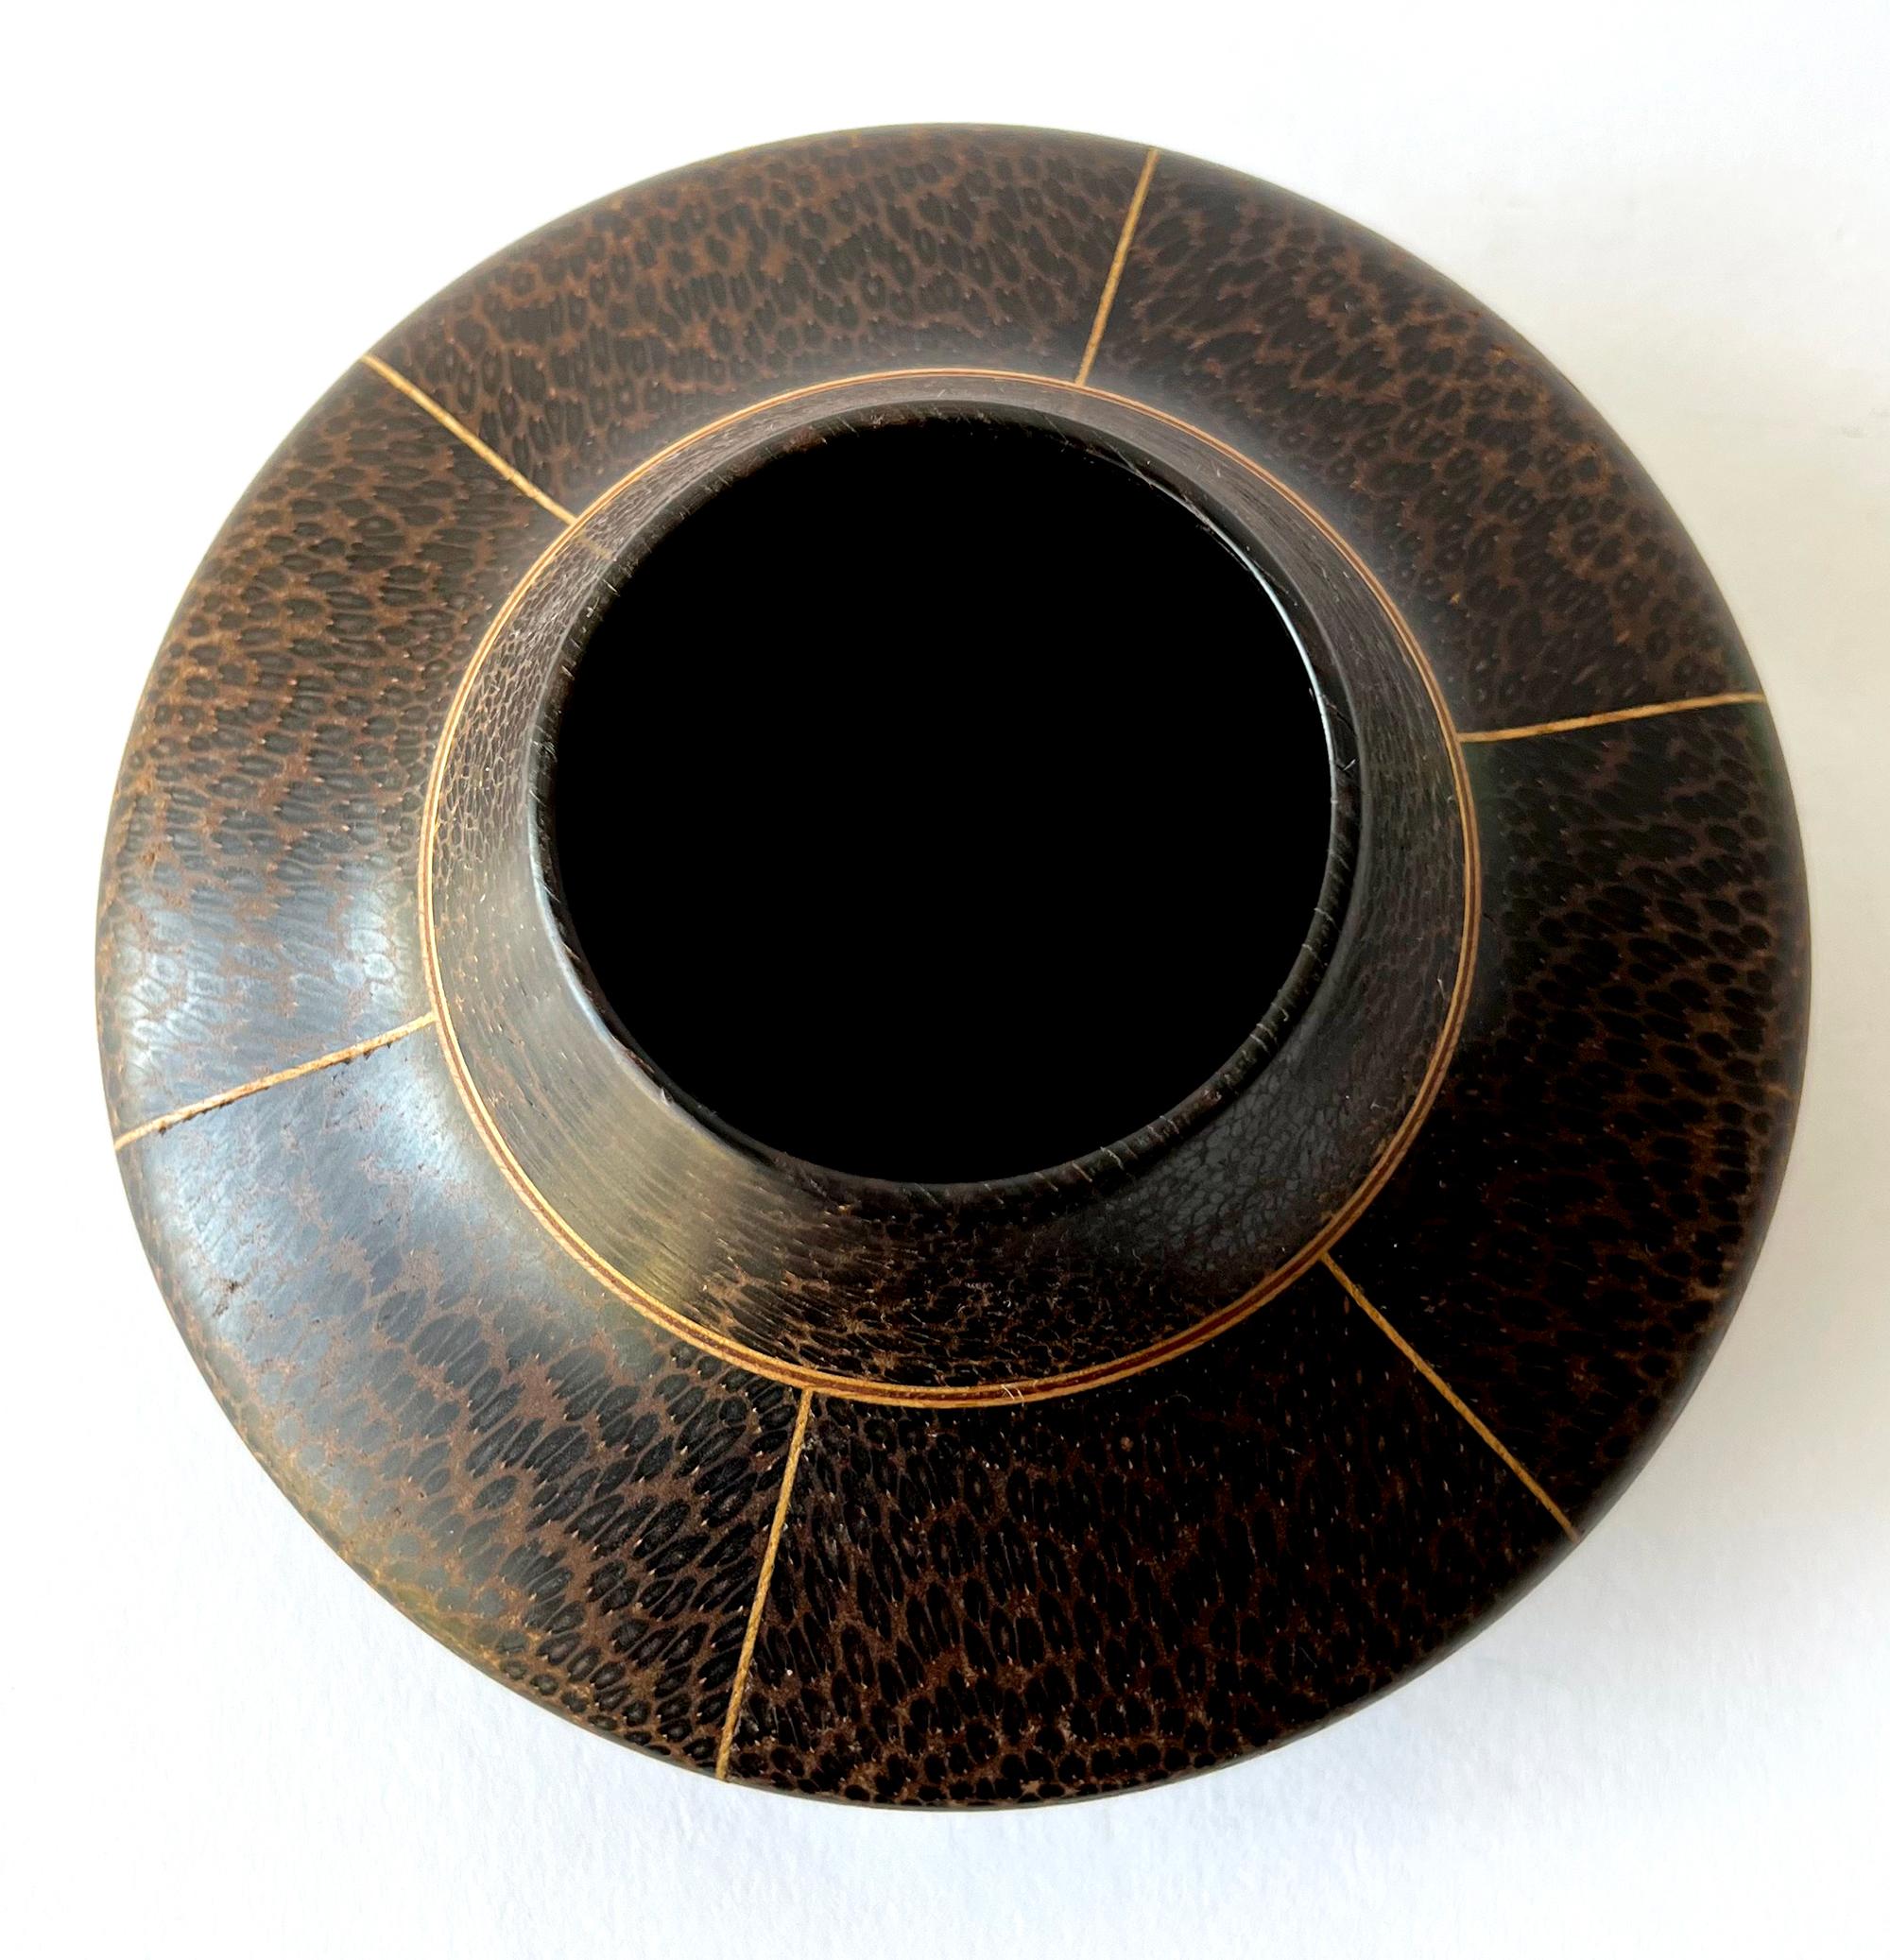 Hand turned black palm and maple vase created by Galen Carpenter, circa 1980s. Vase measures 3.75